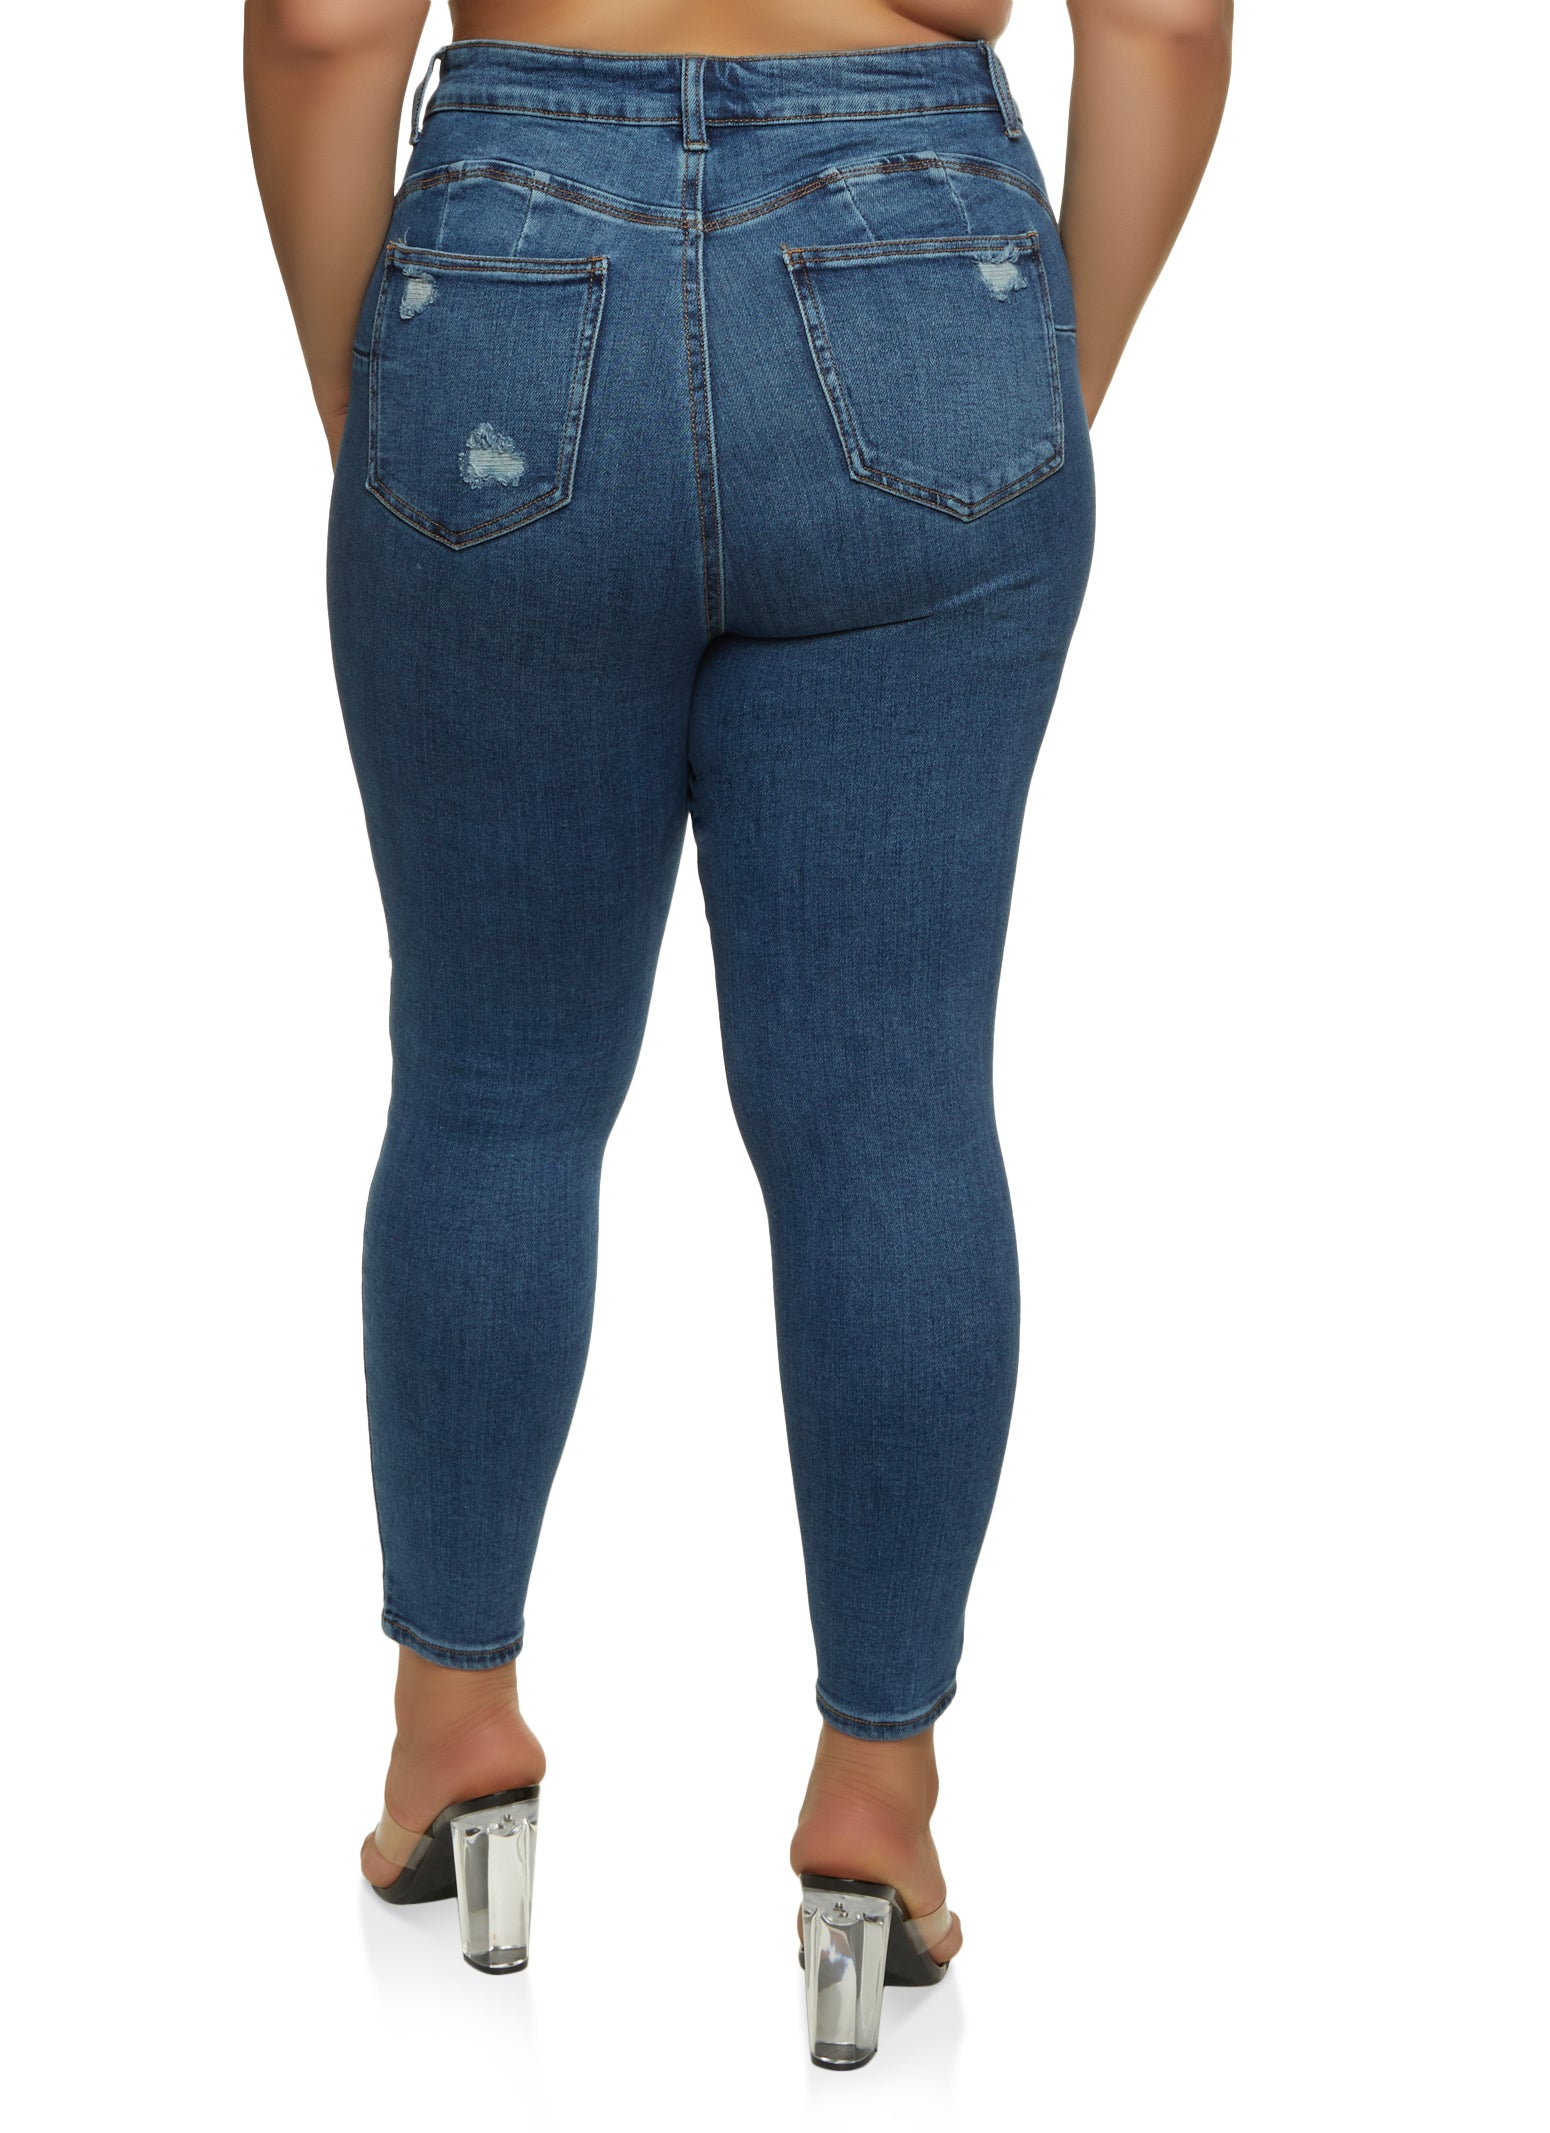 Womens Plus Size WAX Distressed High Waisted Skinny Jeans, Blue, Size 20